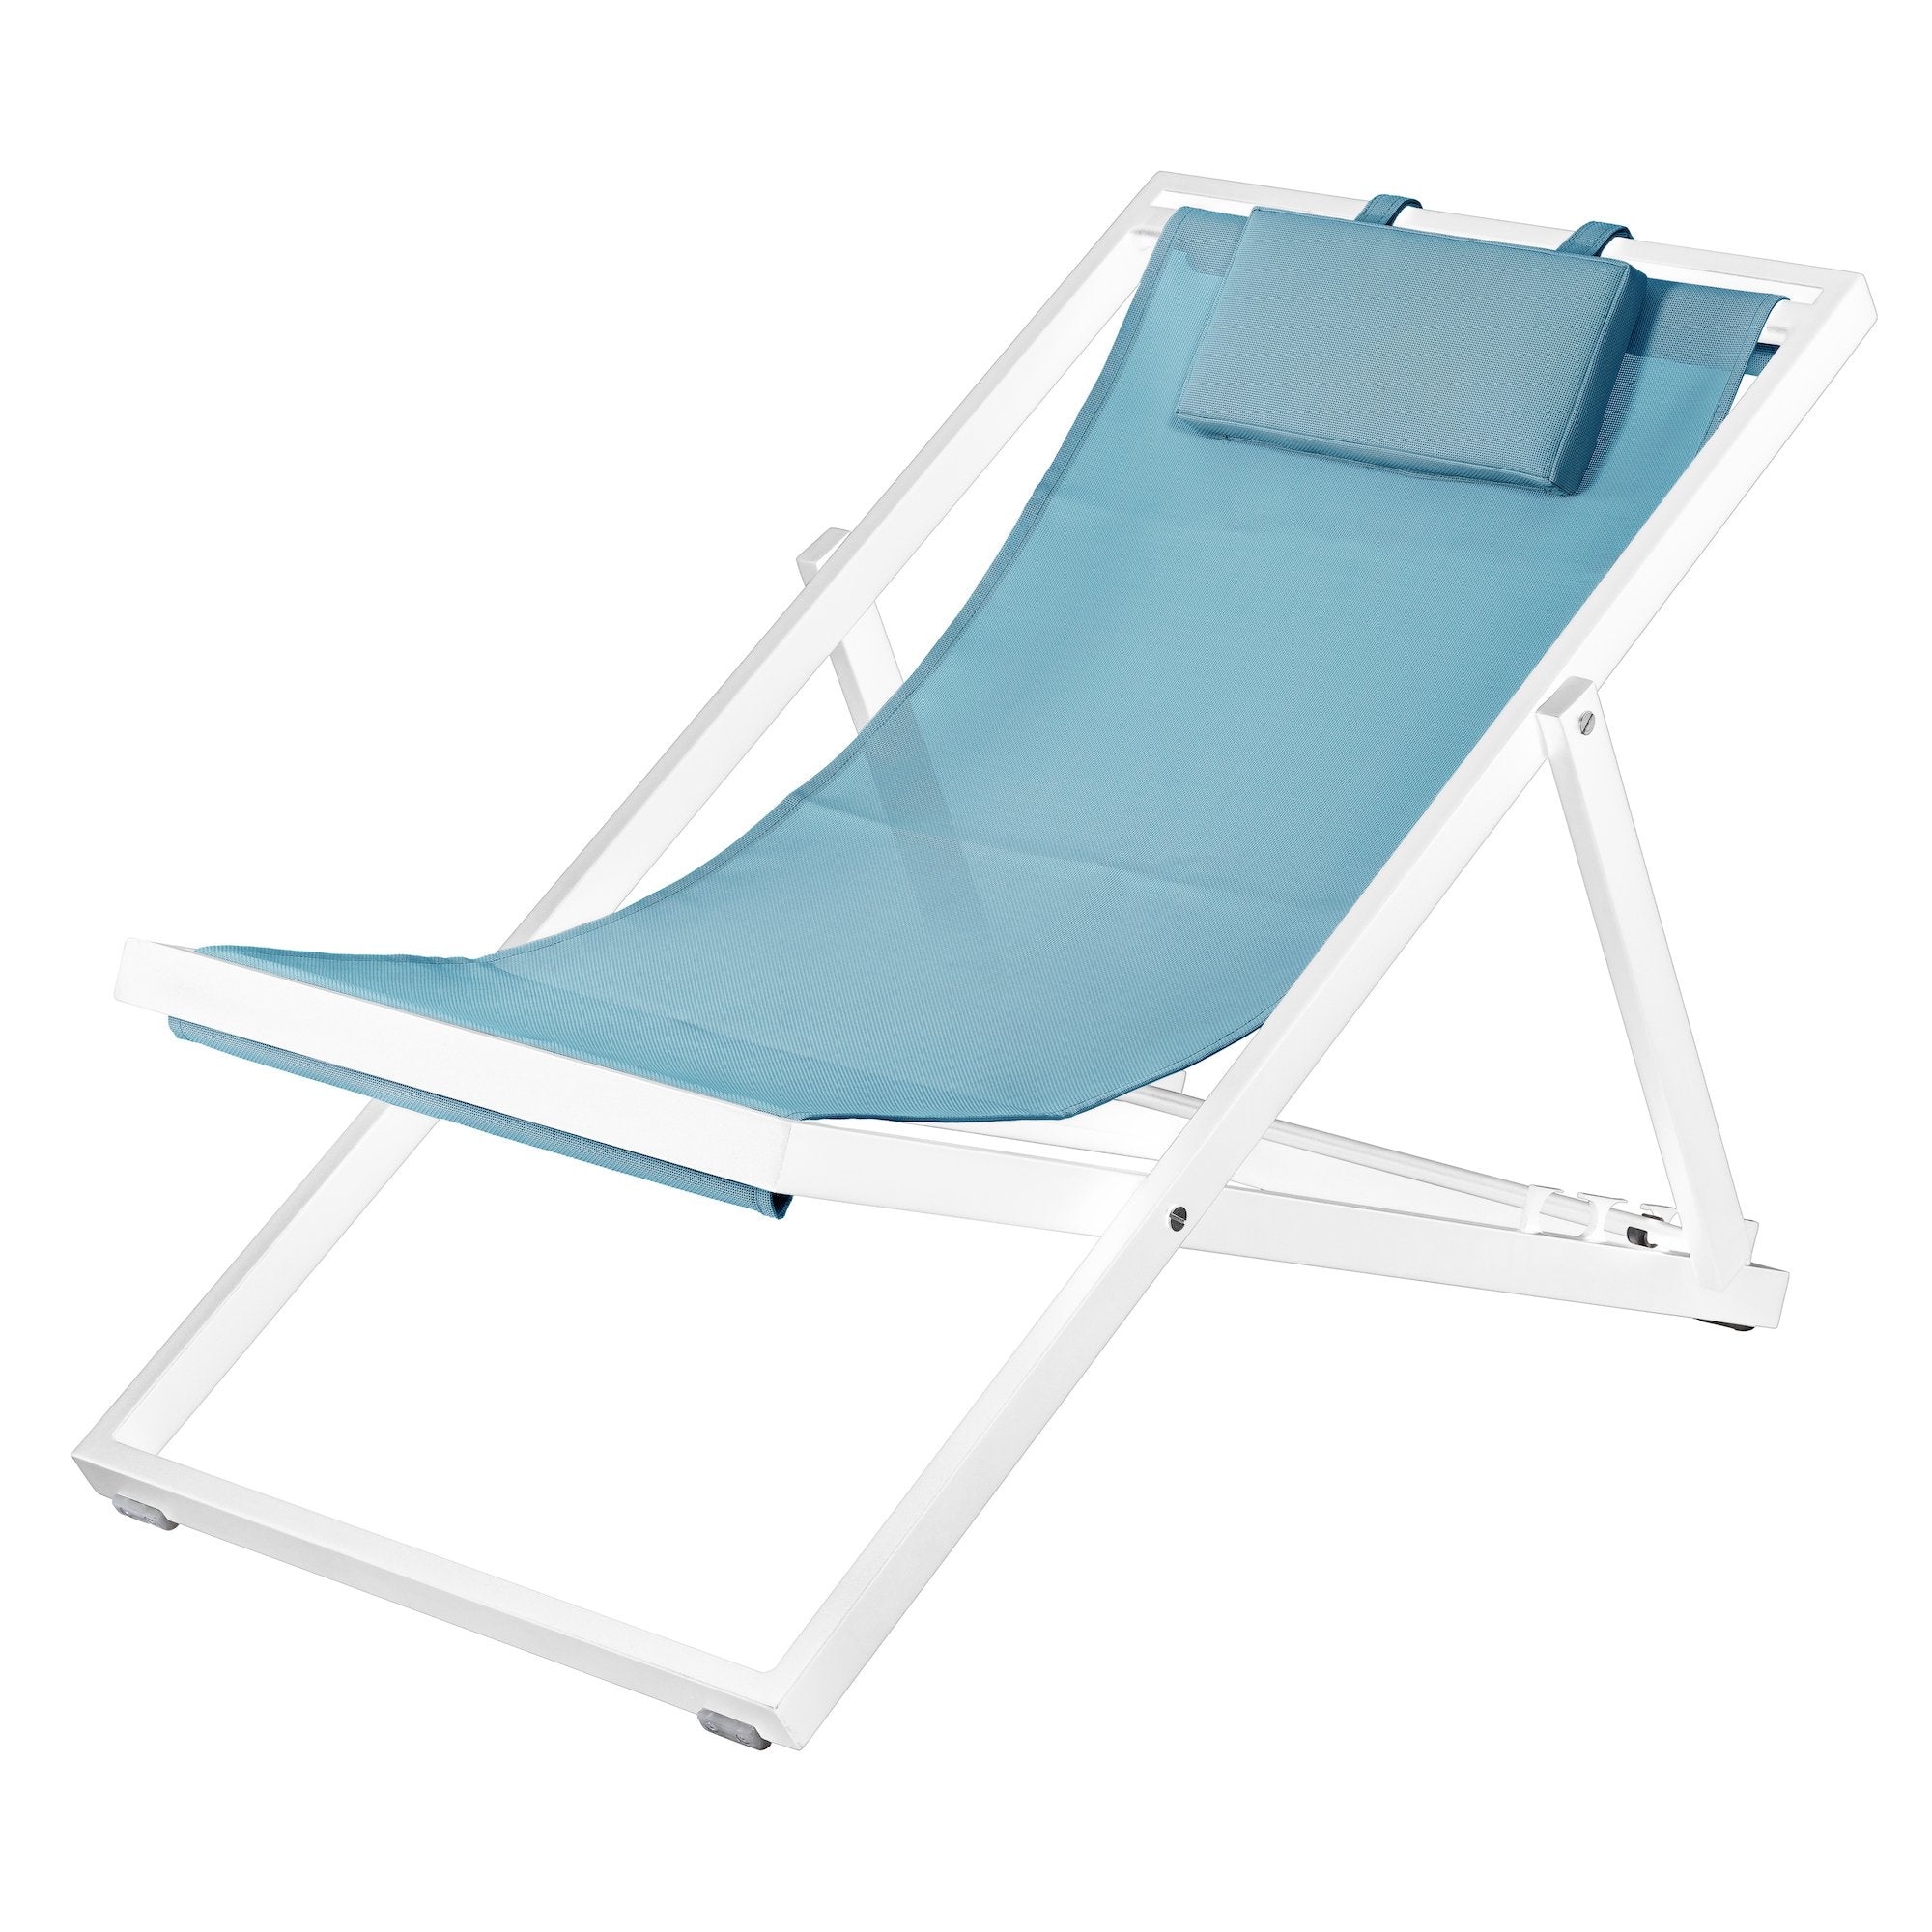 Duramax Lounger Turquoise Newport Lounger (3 Colors)